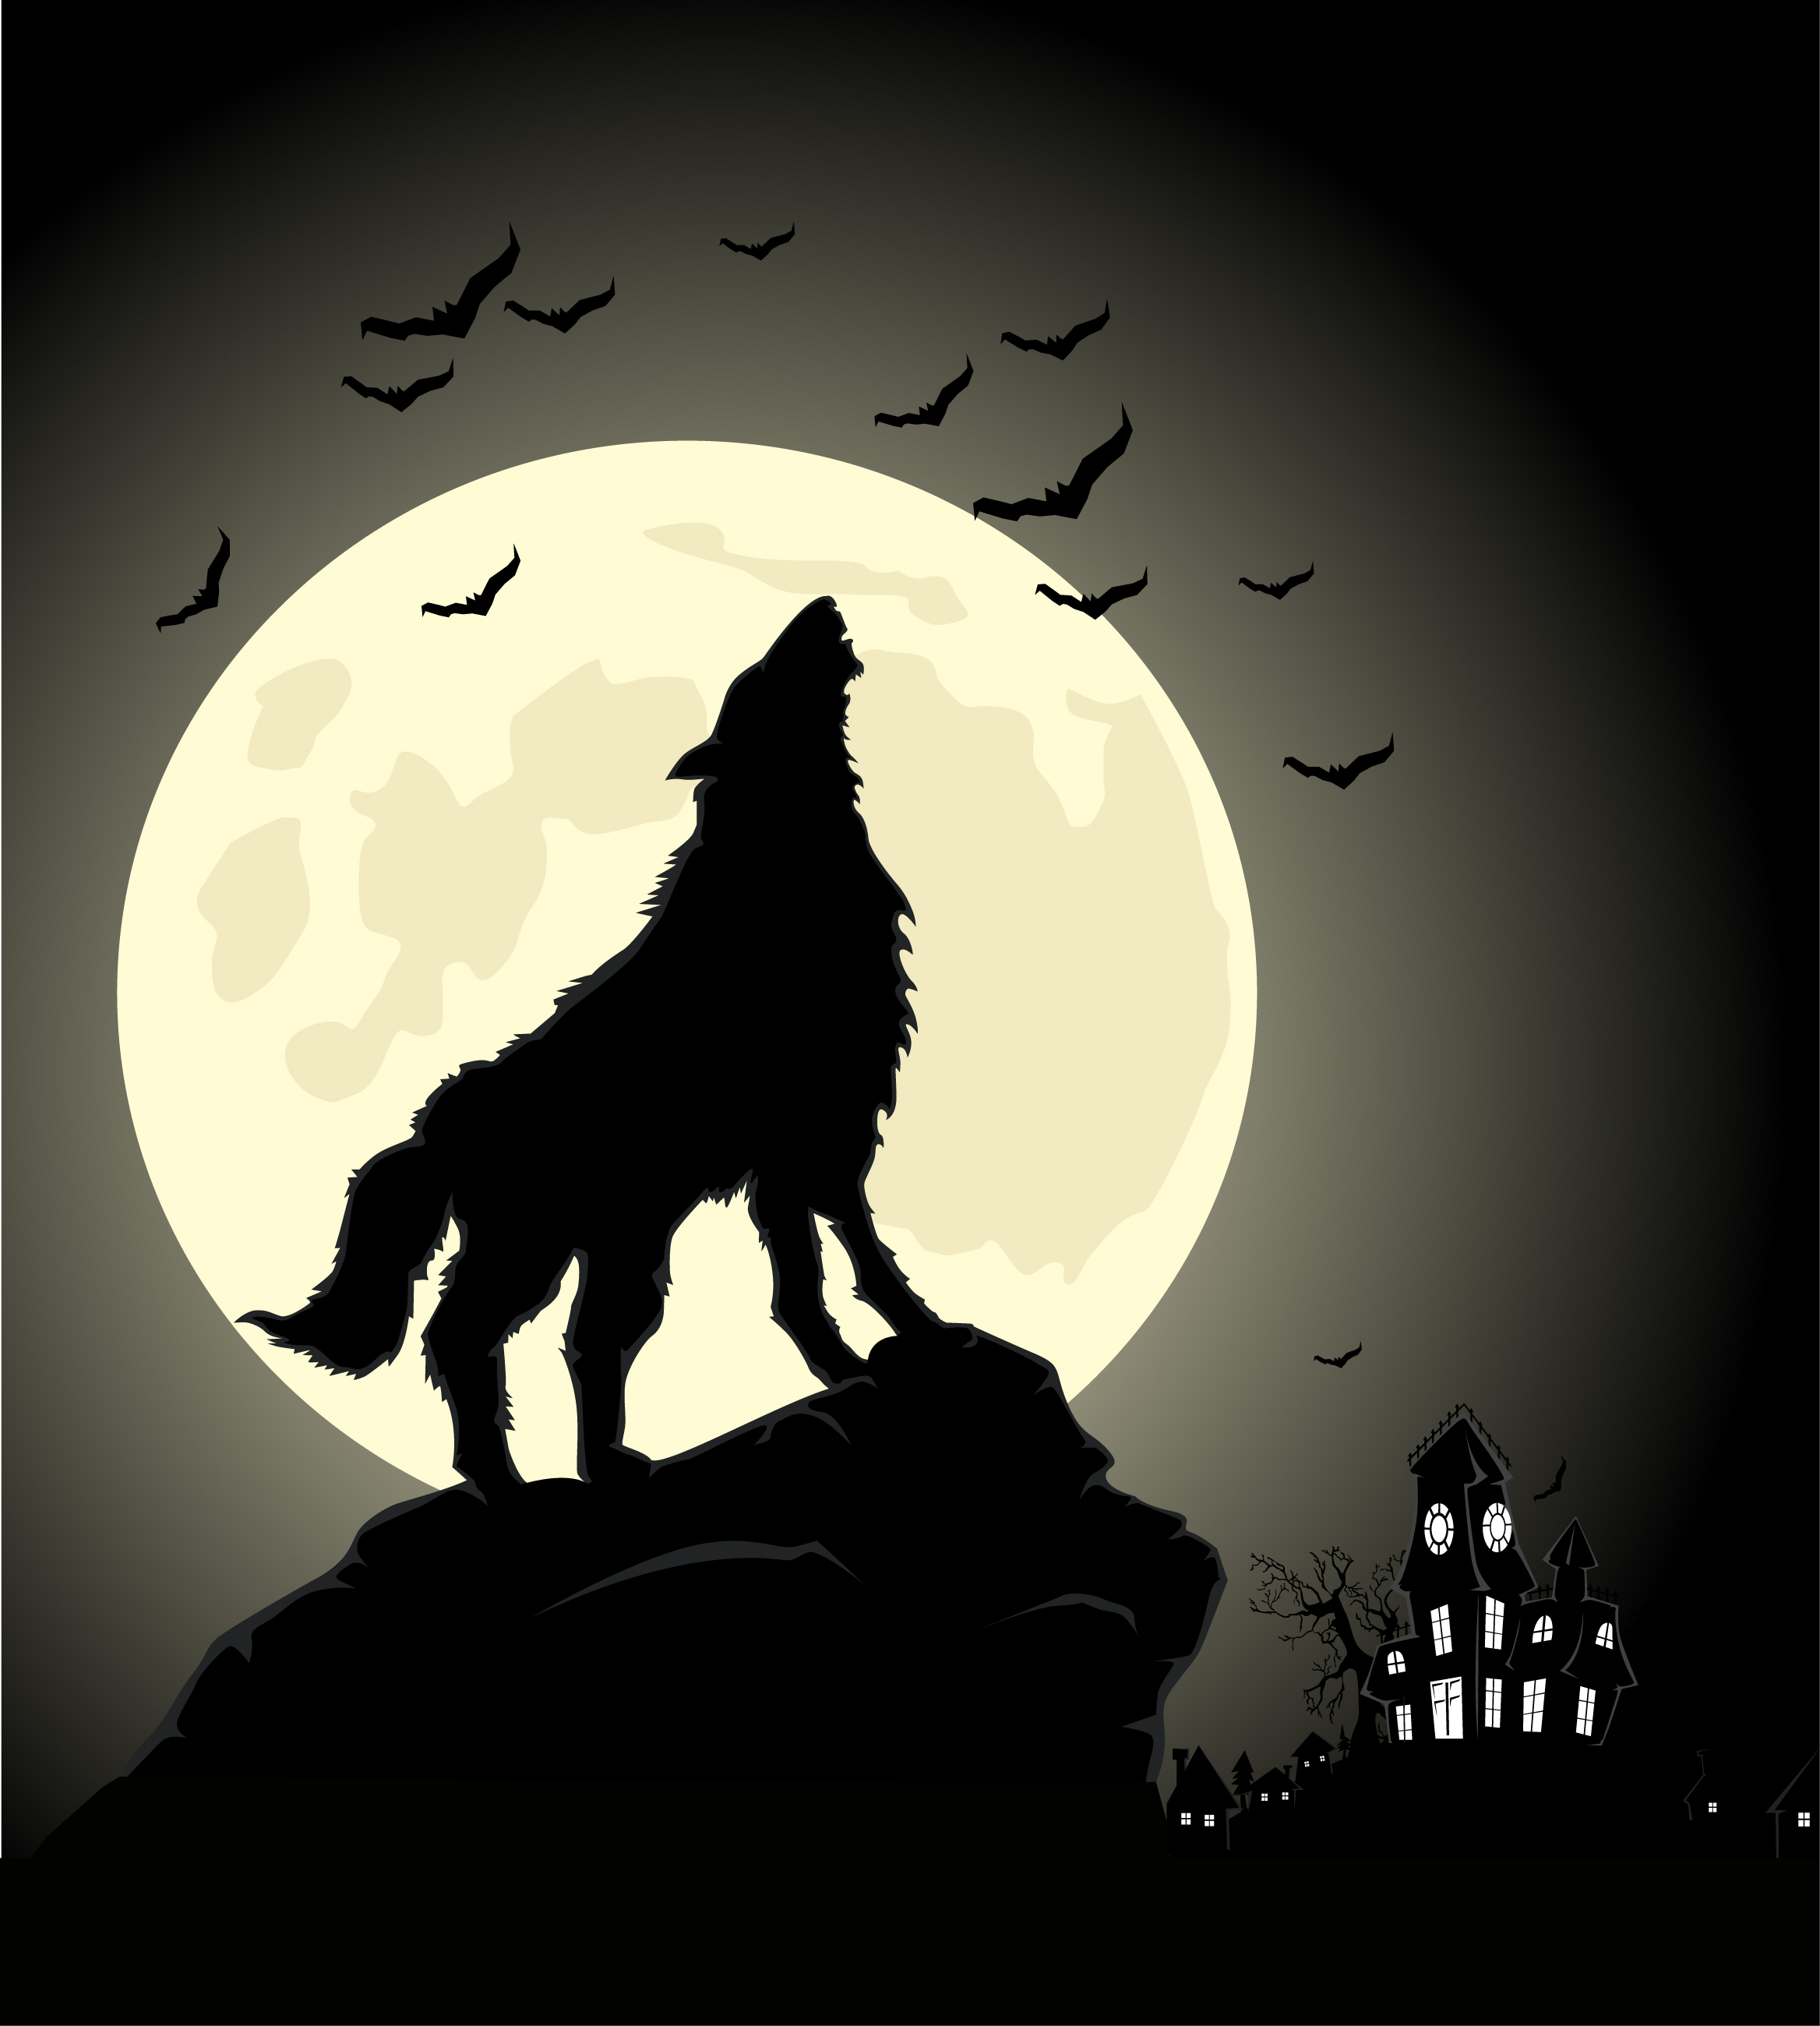 Happy “Howl at the Moon Day and Night” Day!? SPEAK!